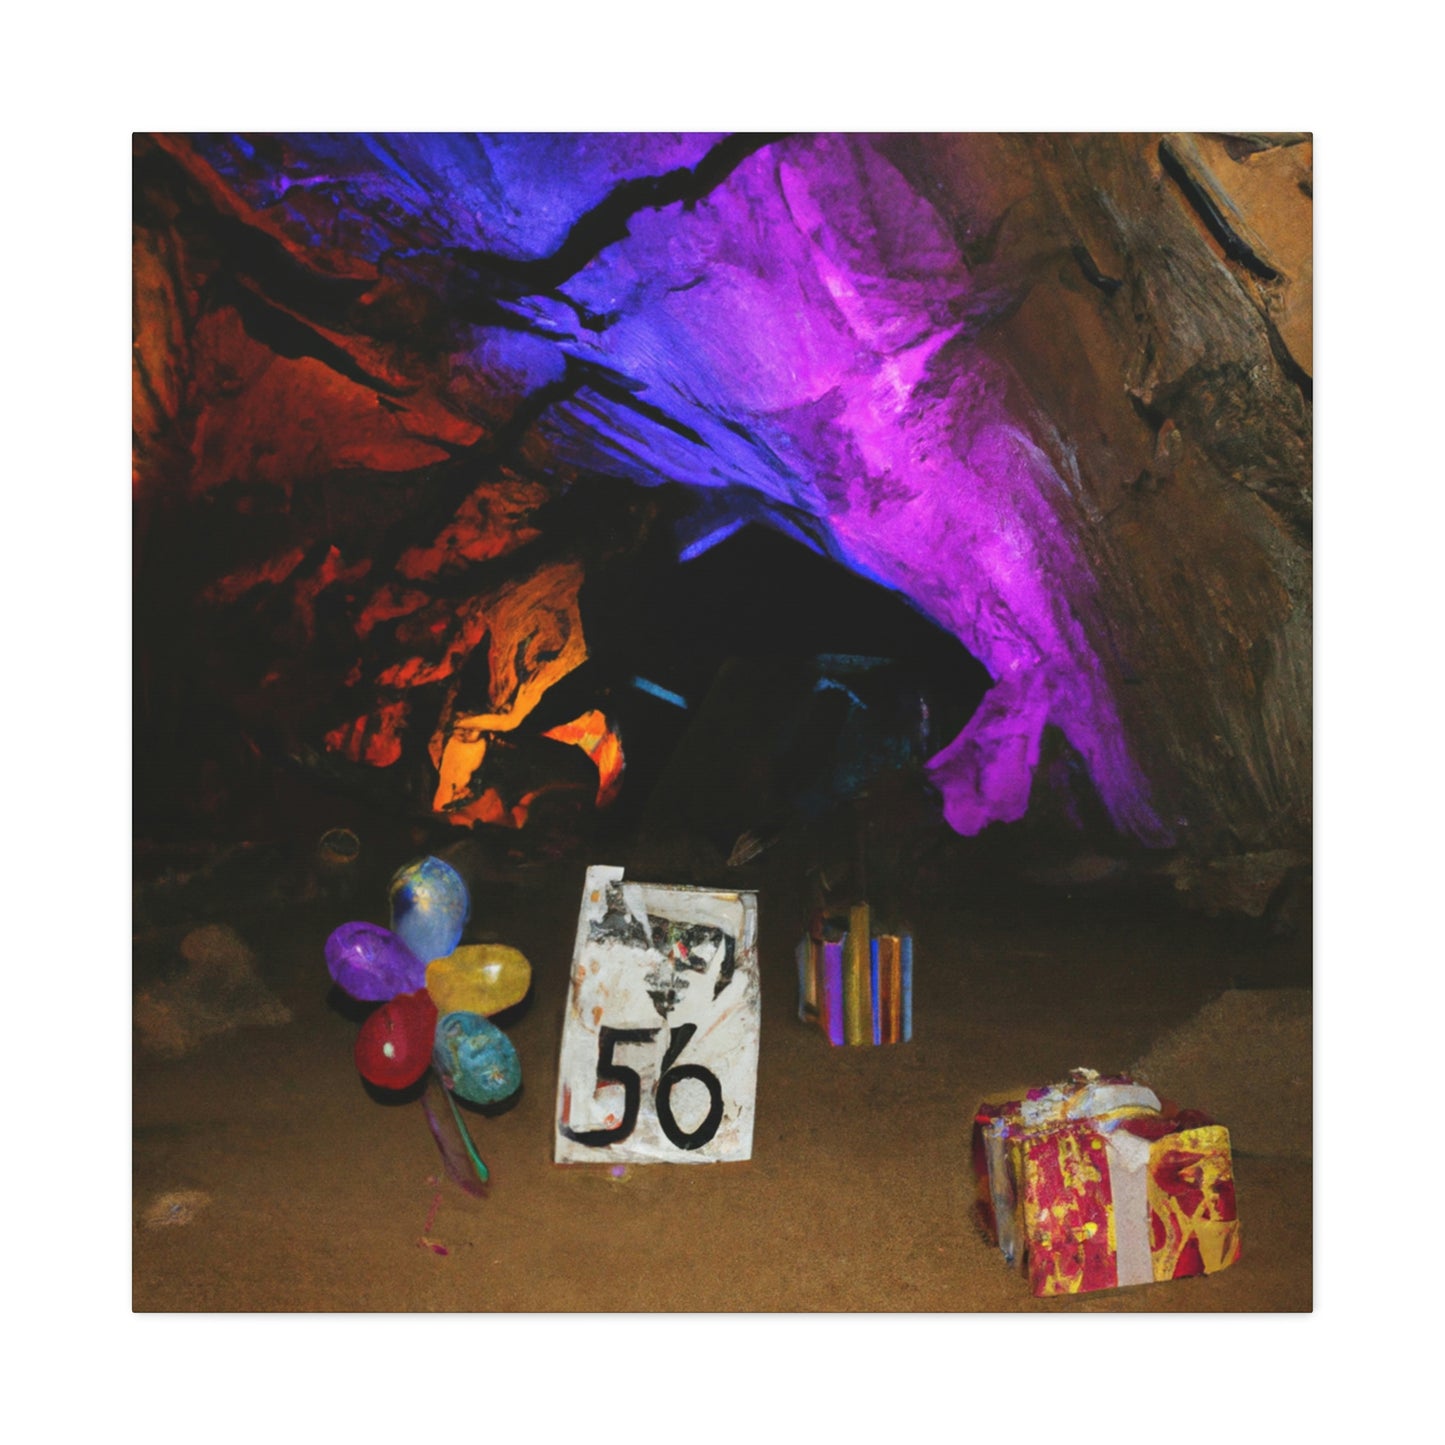 "A Mind-Bending Birthday Bash in a Cave" - The Alien Canva